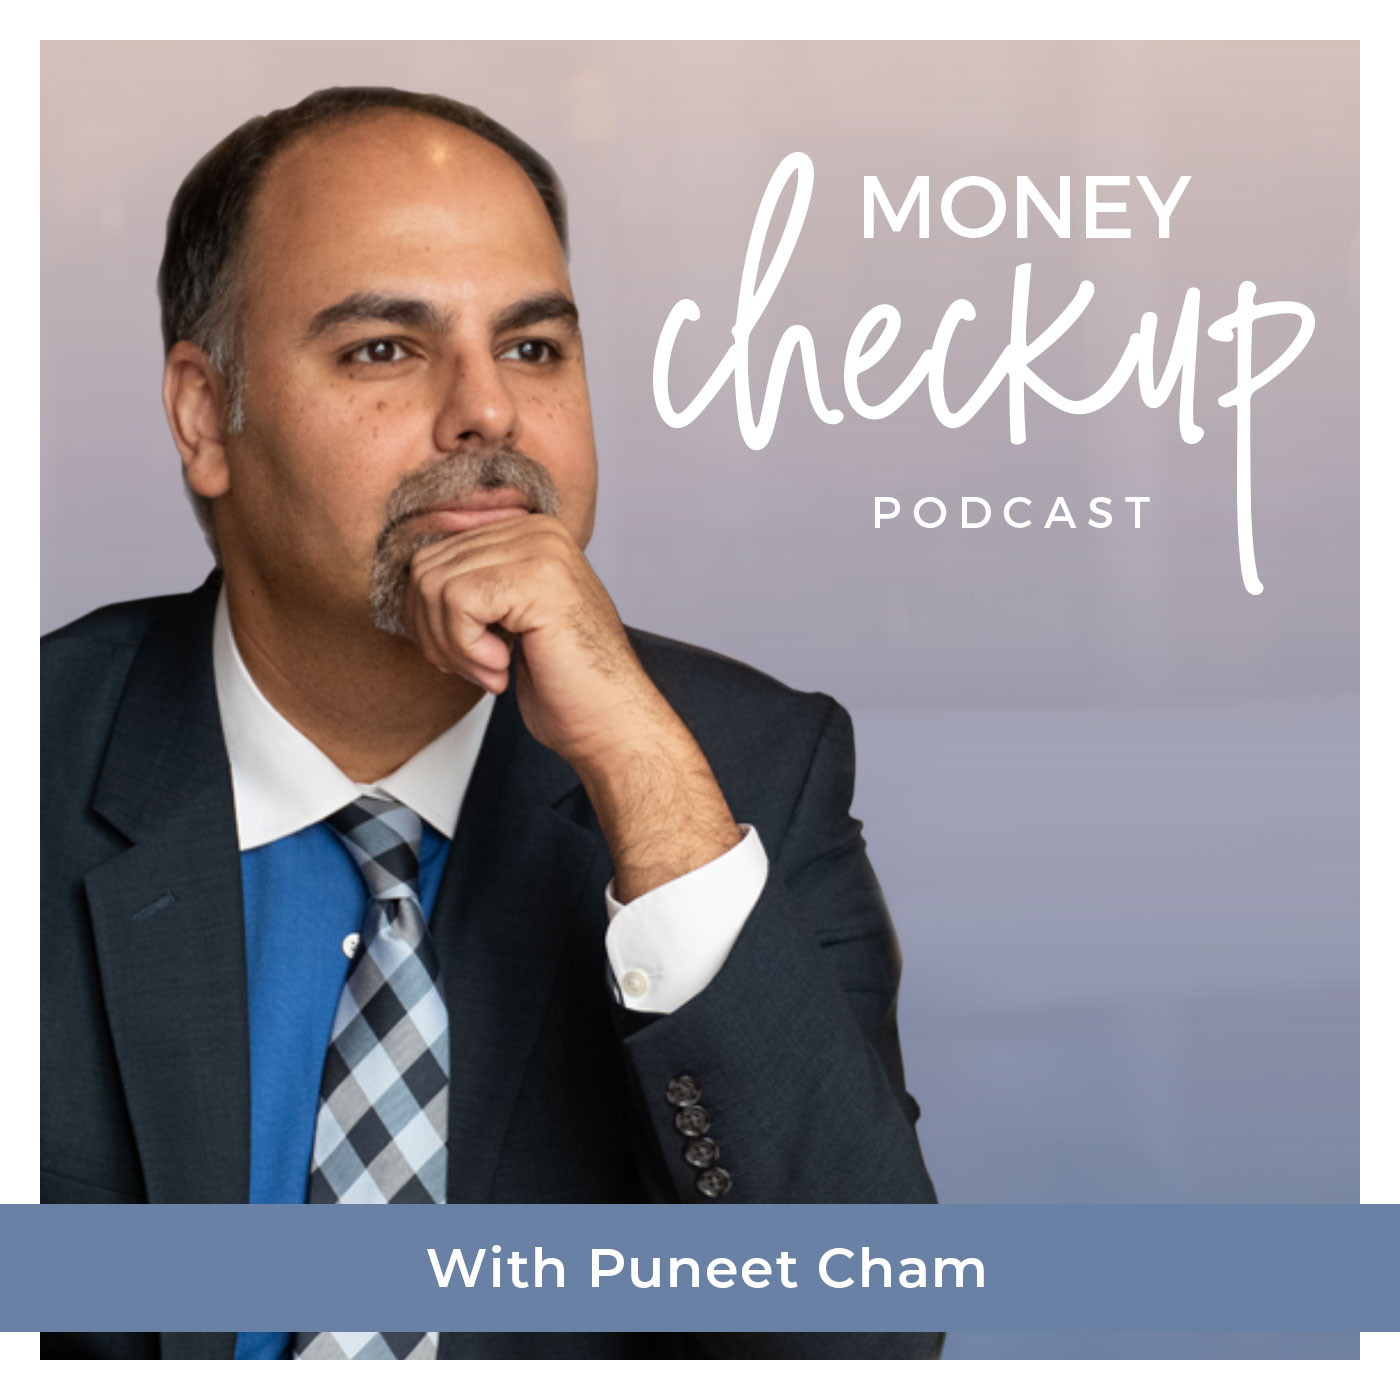 Money Checkup Podcast With Puneet Cham